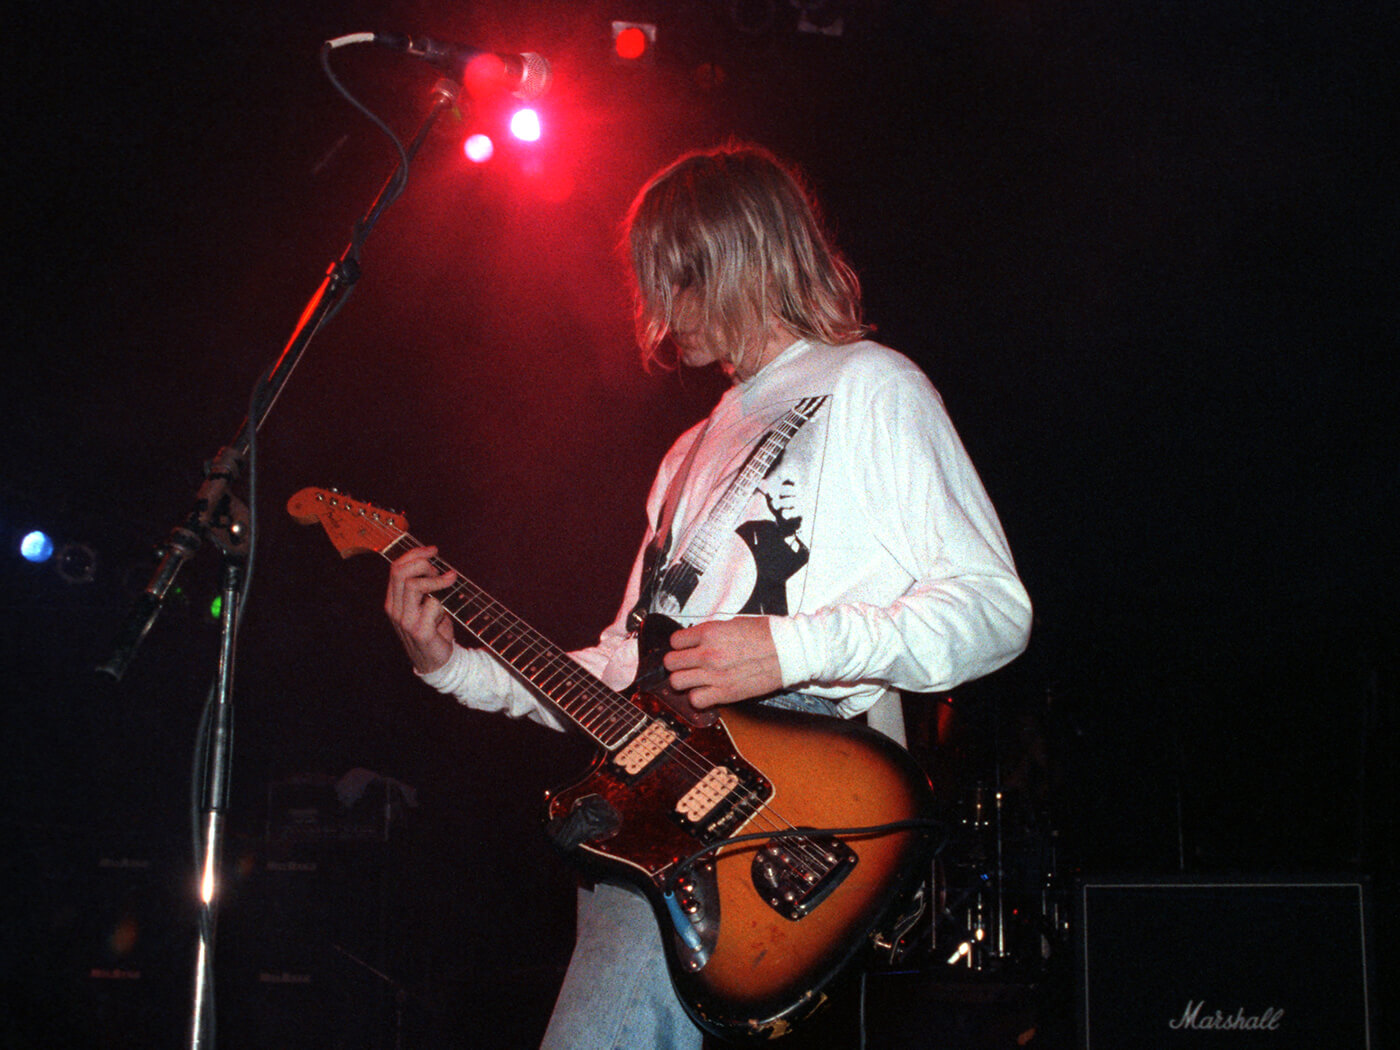 Kurt Cobain playing a Fender Jaguar onstage in 1991, photo by Ian Dickson/Redferns via Getty Images